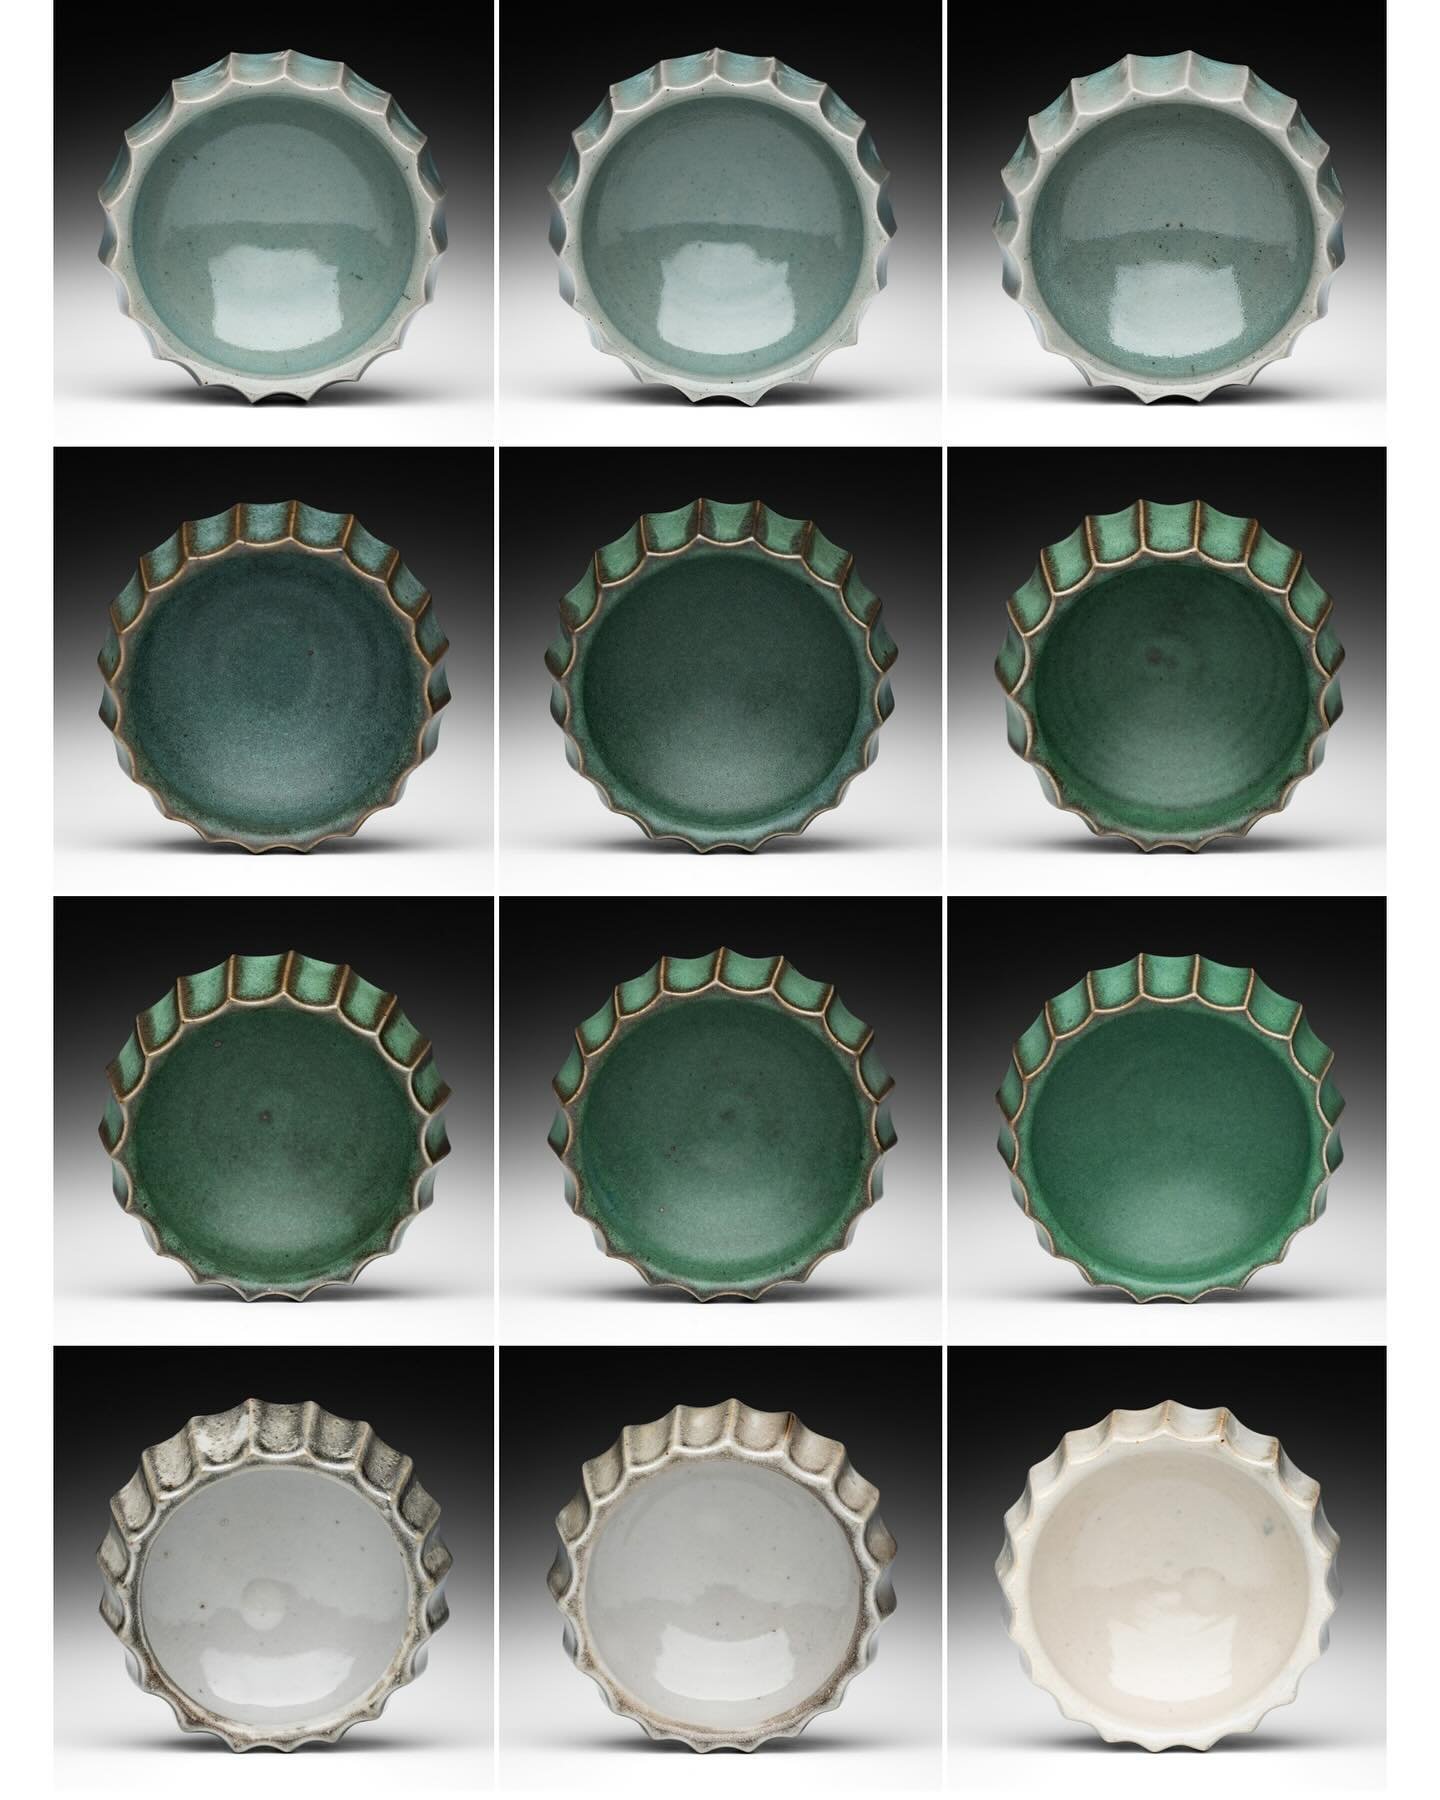 12 fluted bowls, each thrown on the wheel, carved by hand, and then finished with celadon, &ldquo;basil&rdquo;, and shino glazes. These images highlight their wavy rims and how the different glazes interact with the crisp edges/corners. I&rsquo;ve be